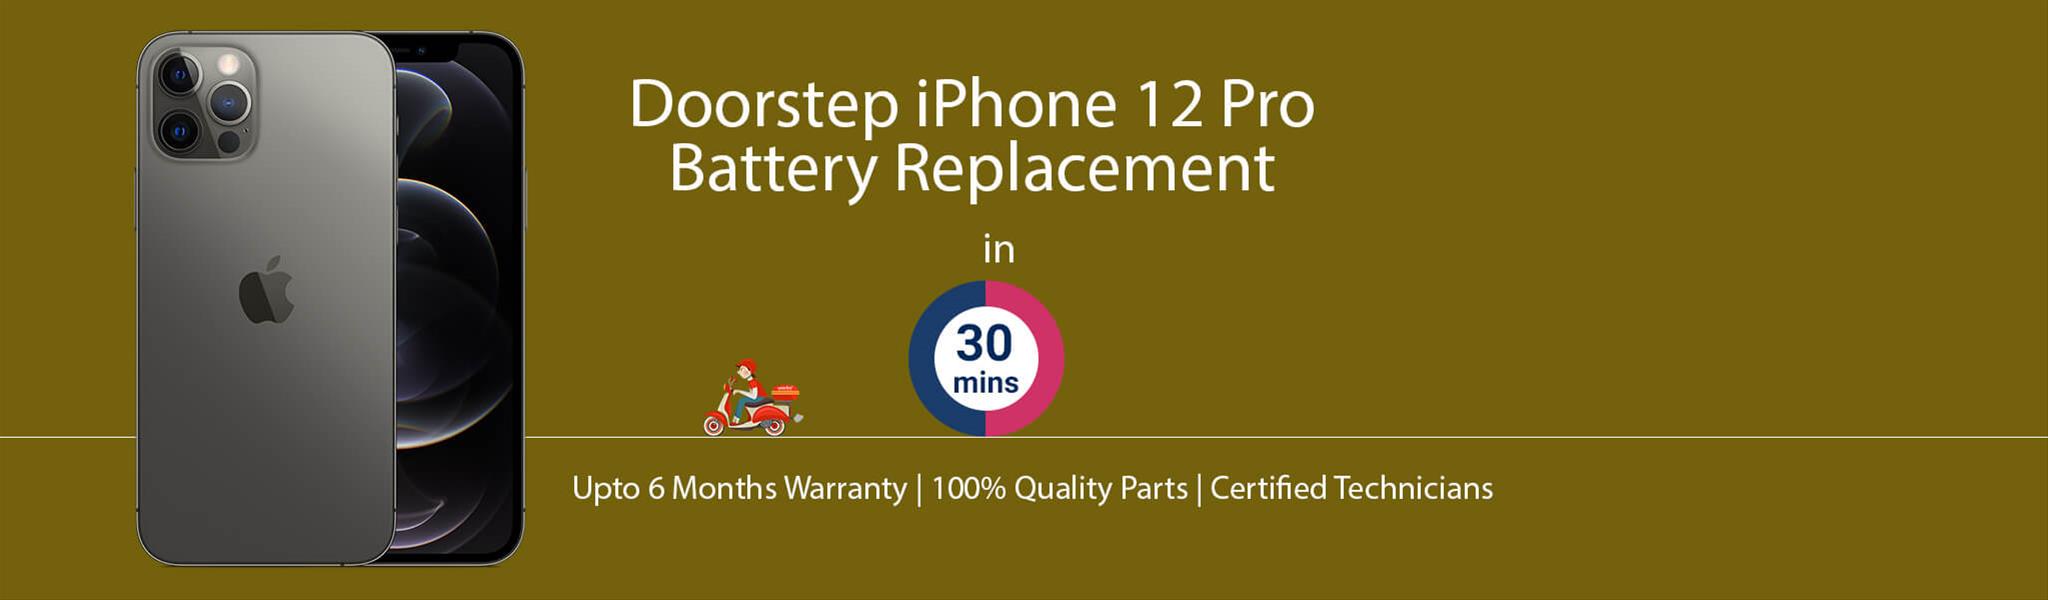 iphone-12-pro-battery-replacement.jpg